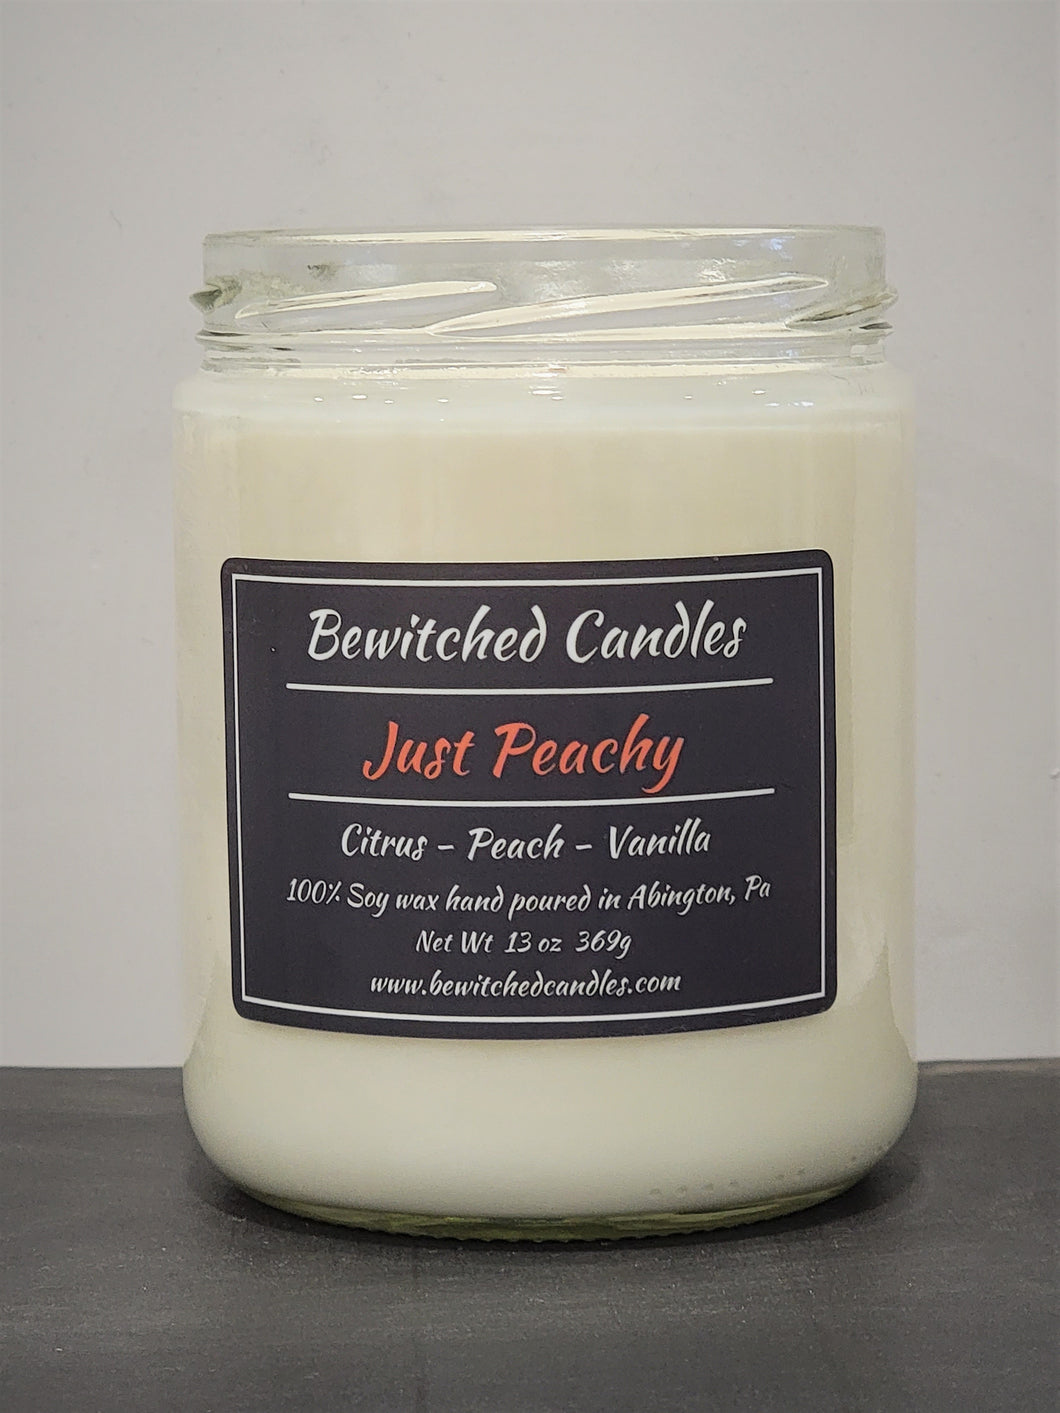 100% Soy wax candle hand poured in our USA made glass jars using premium fragrance oils cotton wicks with hints of Citrus, Peach, Vanilla